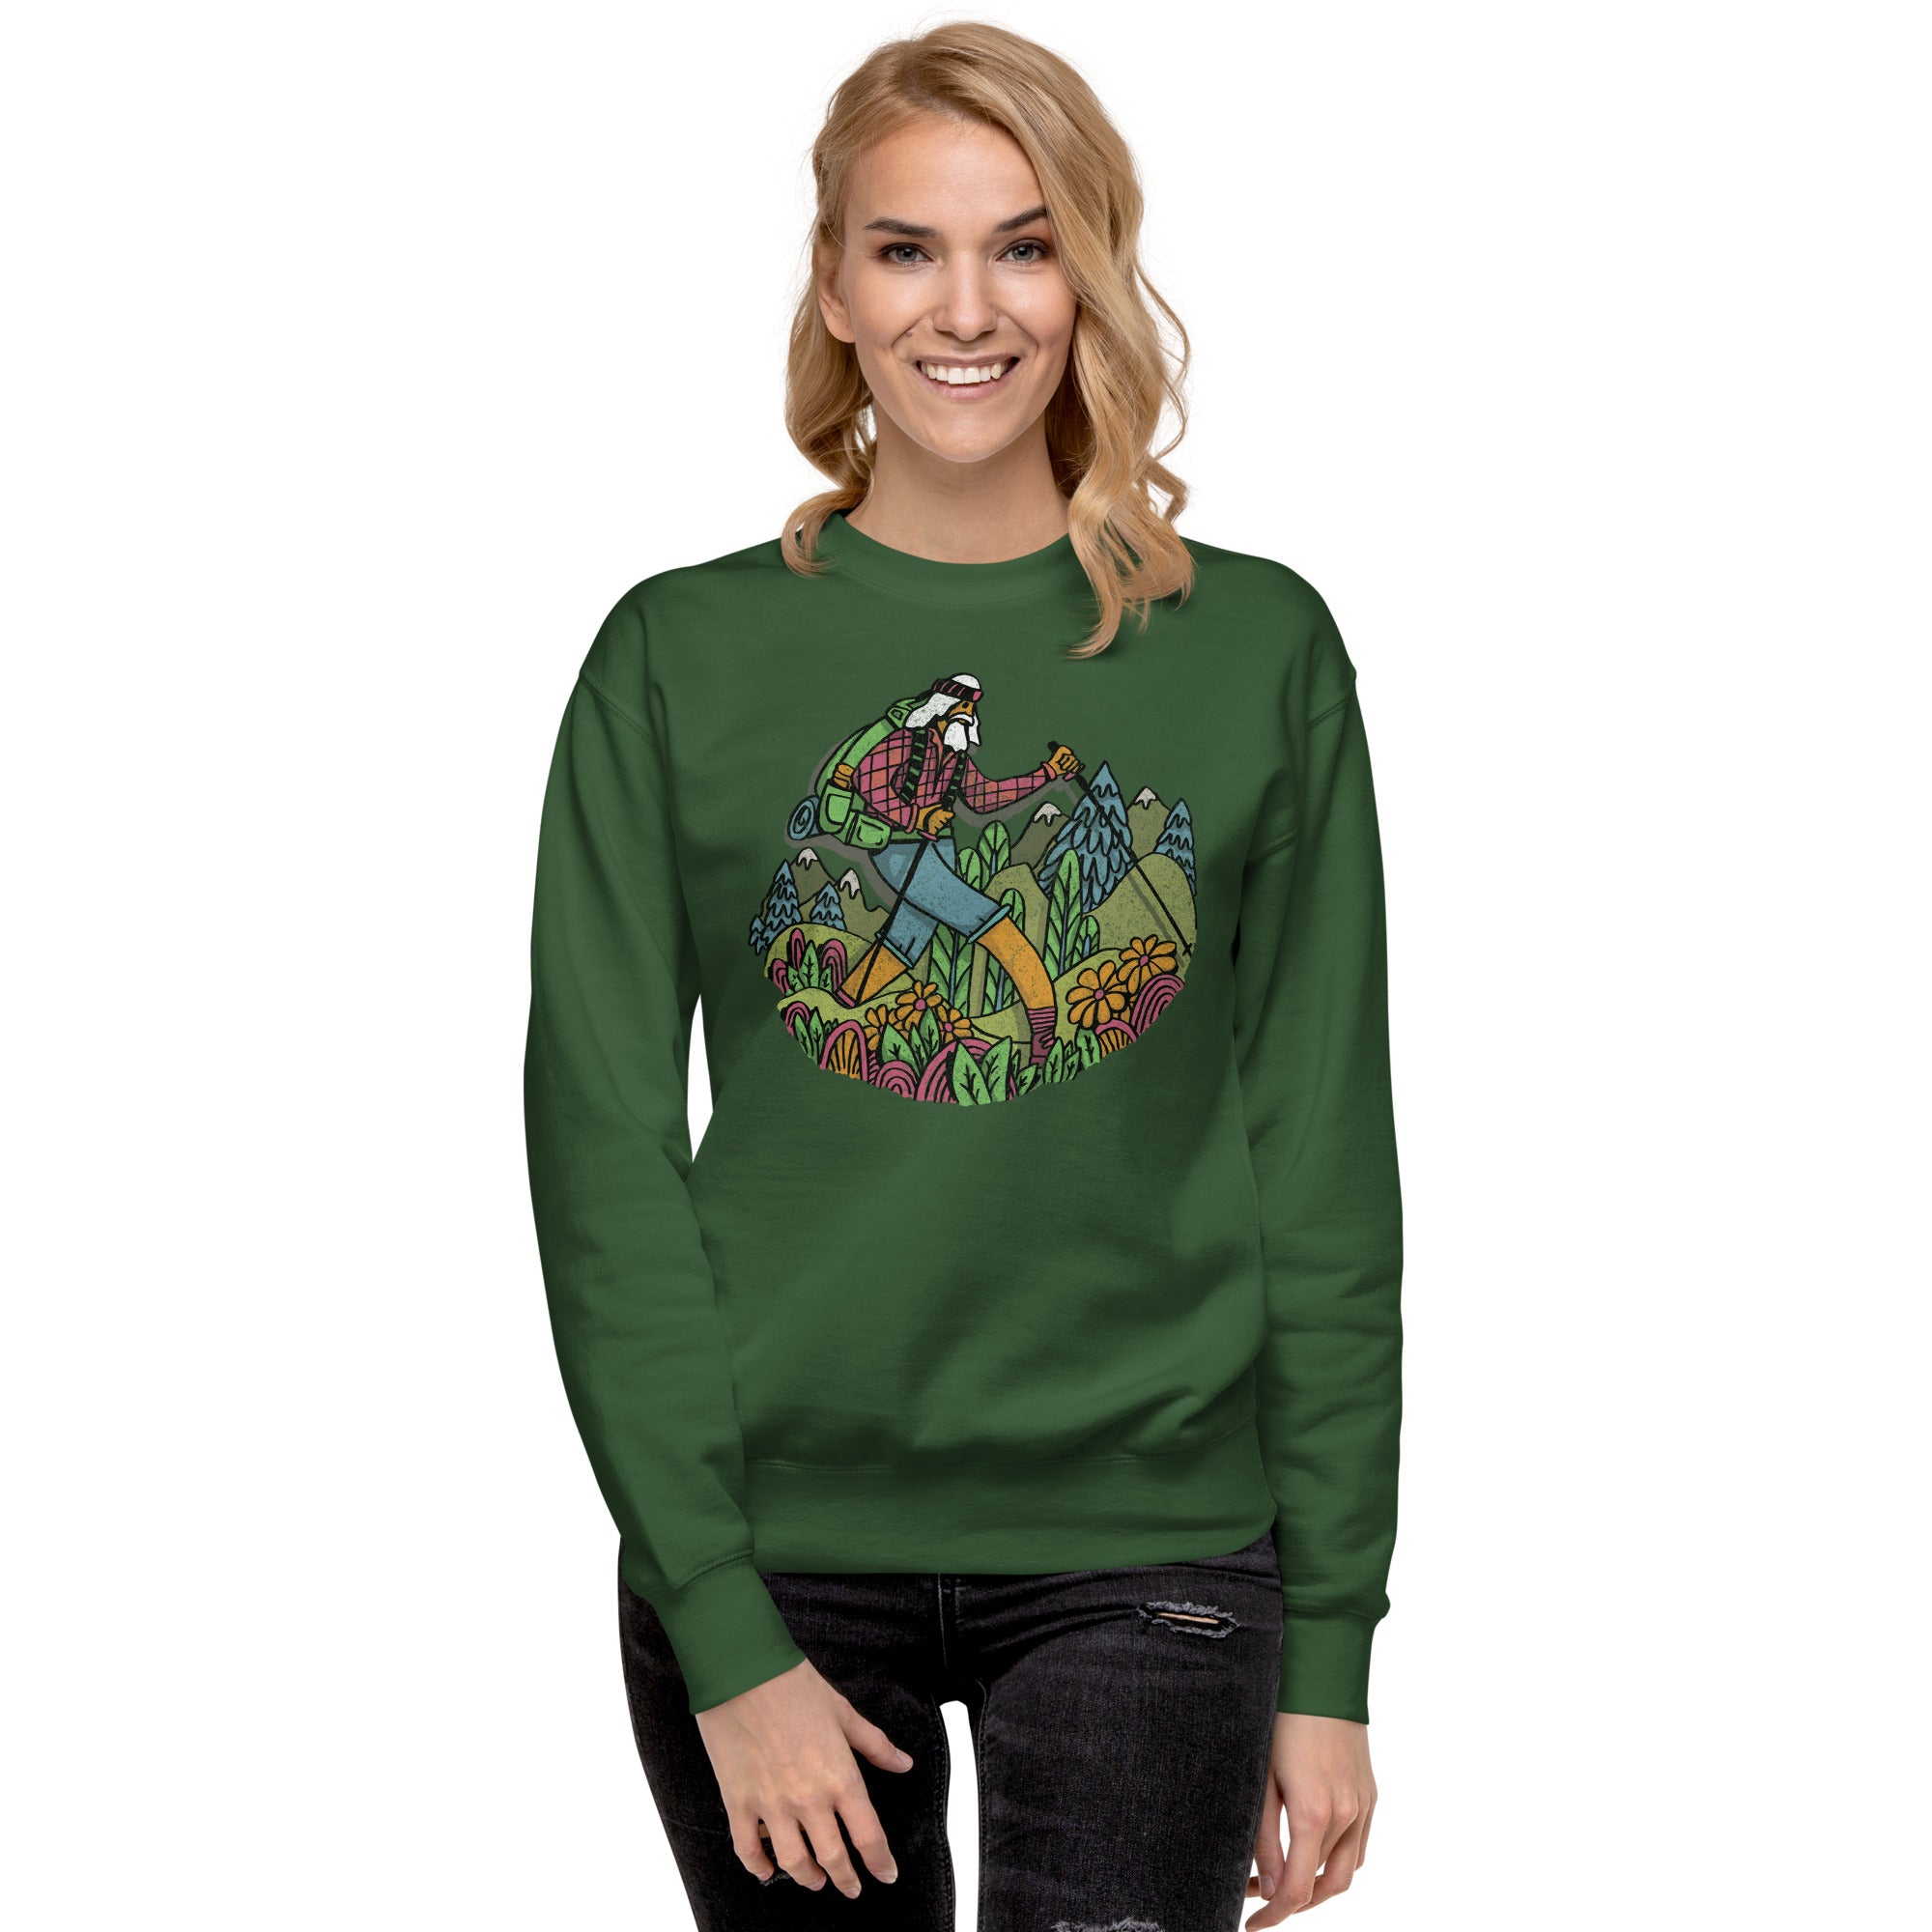 Wise Hiker | Design By Dylan Fant Cool Classic Sweatshirt | Vintage Outdoorsy Fleece | Solid Threads